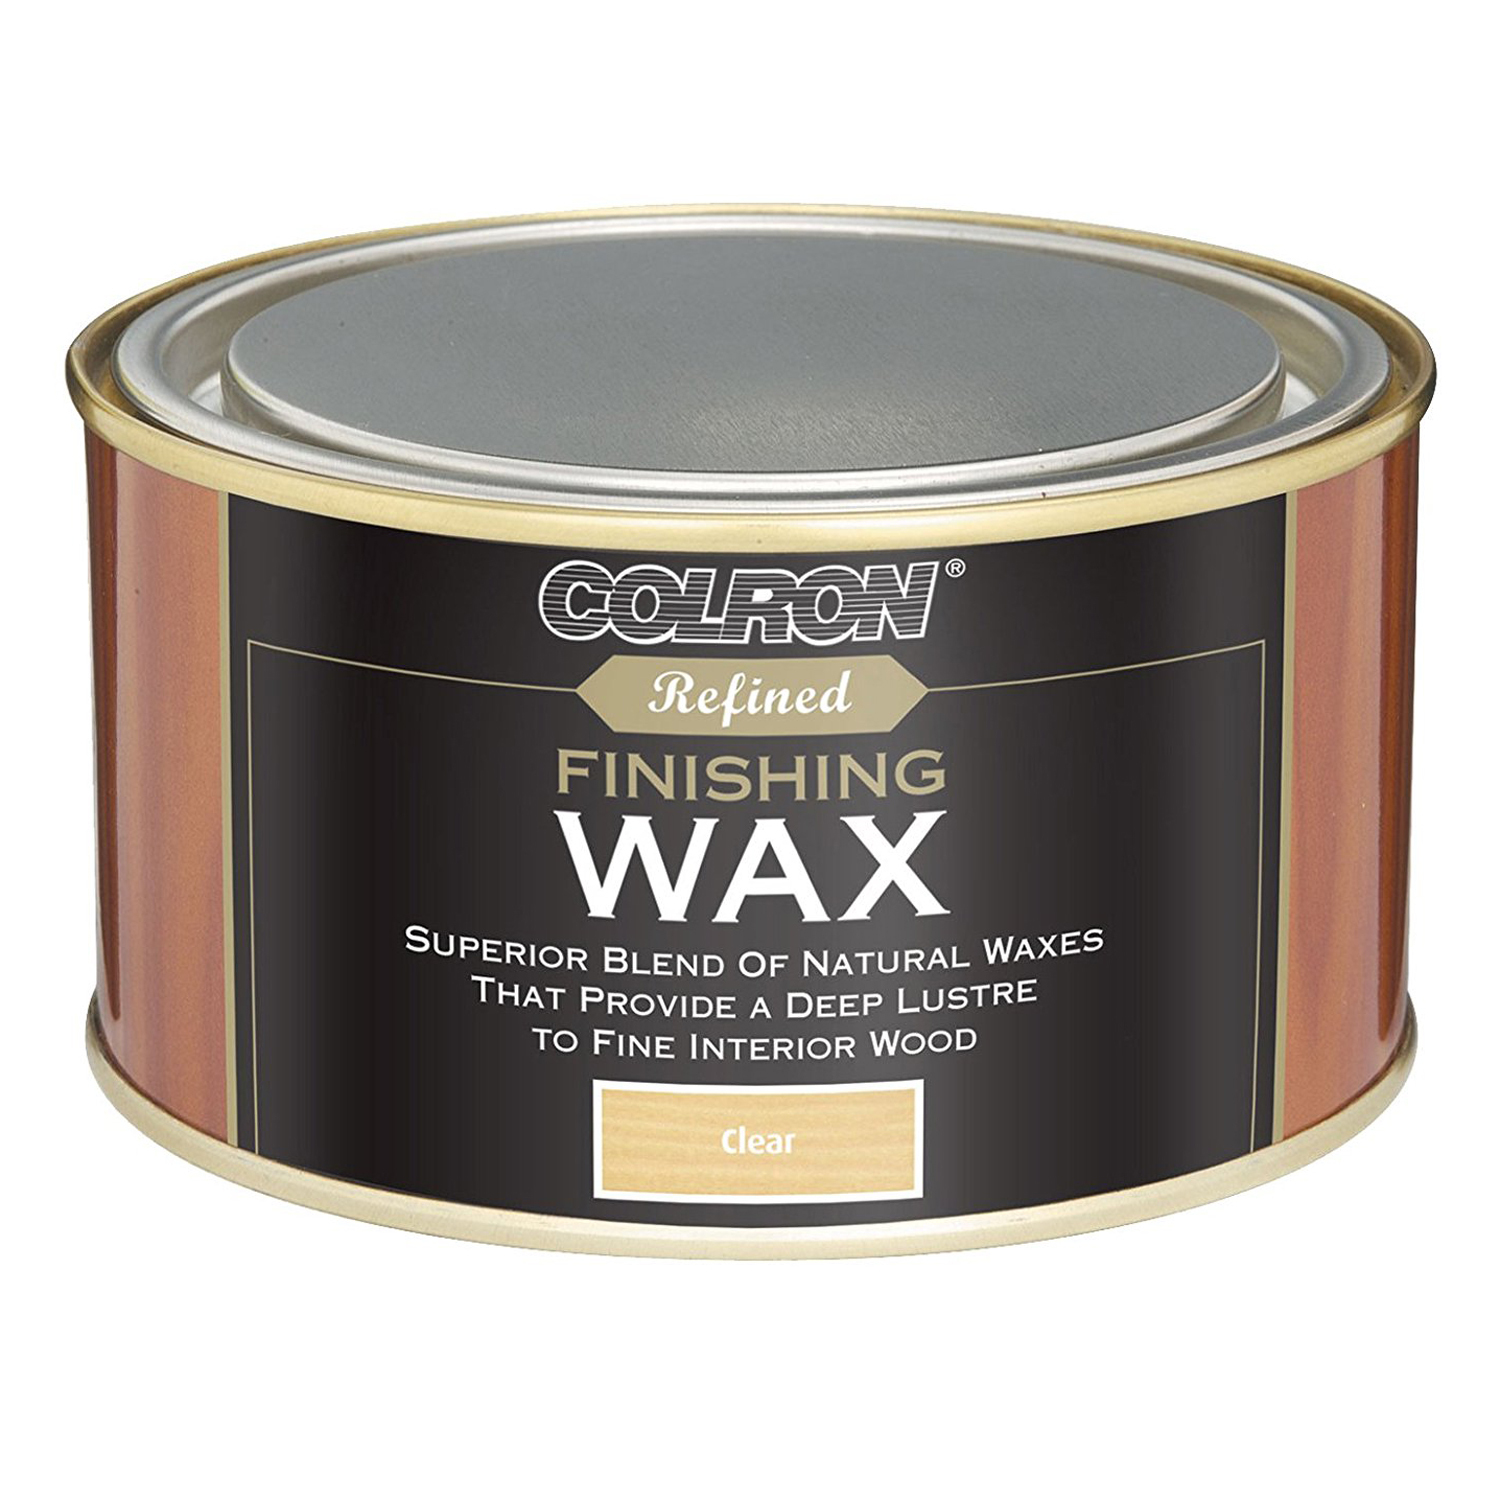 Colron Refined Clear Finishing Wax 325g Image